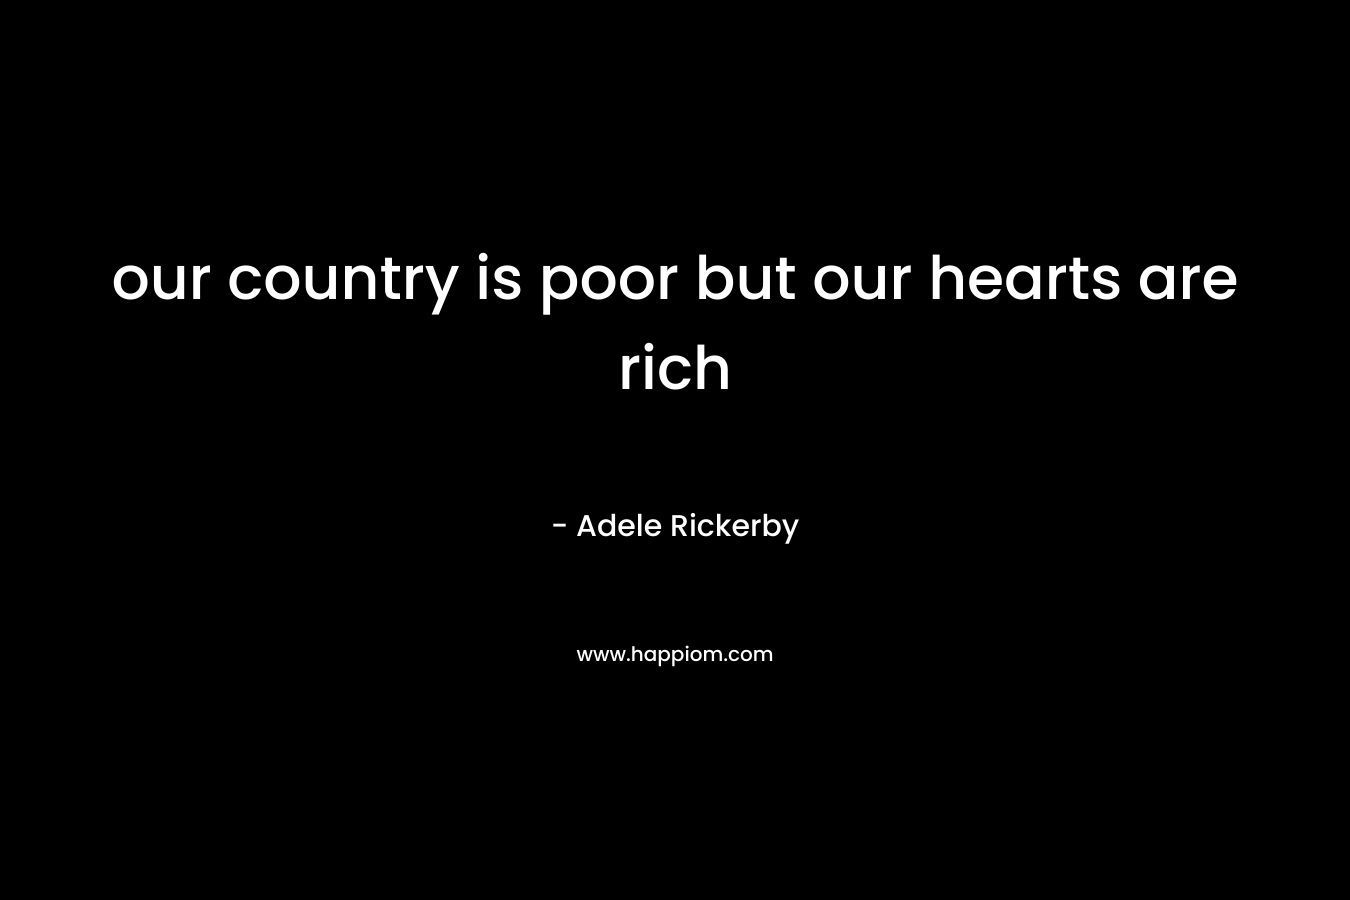 our country is poor but our hearts are rich